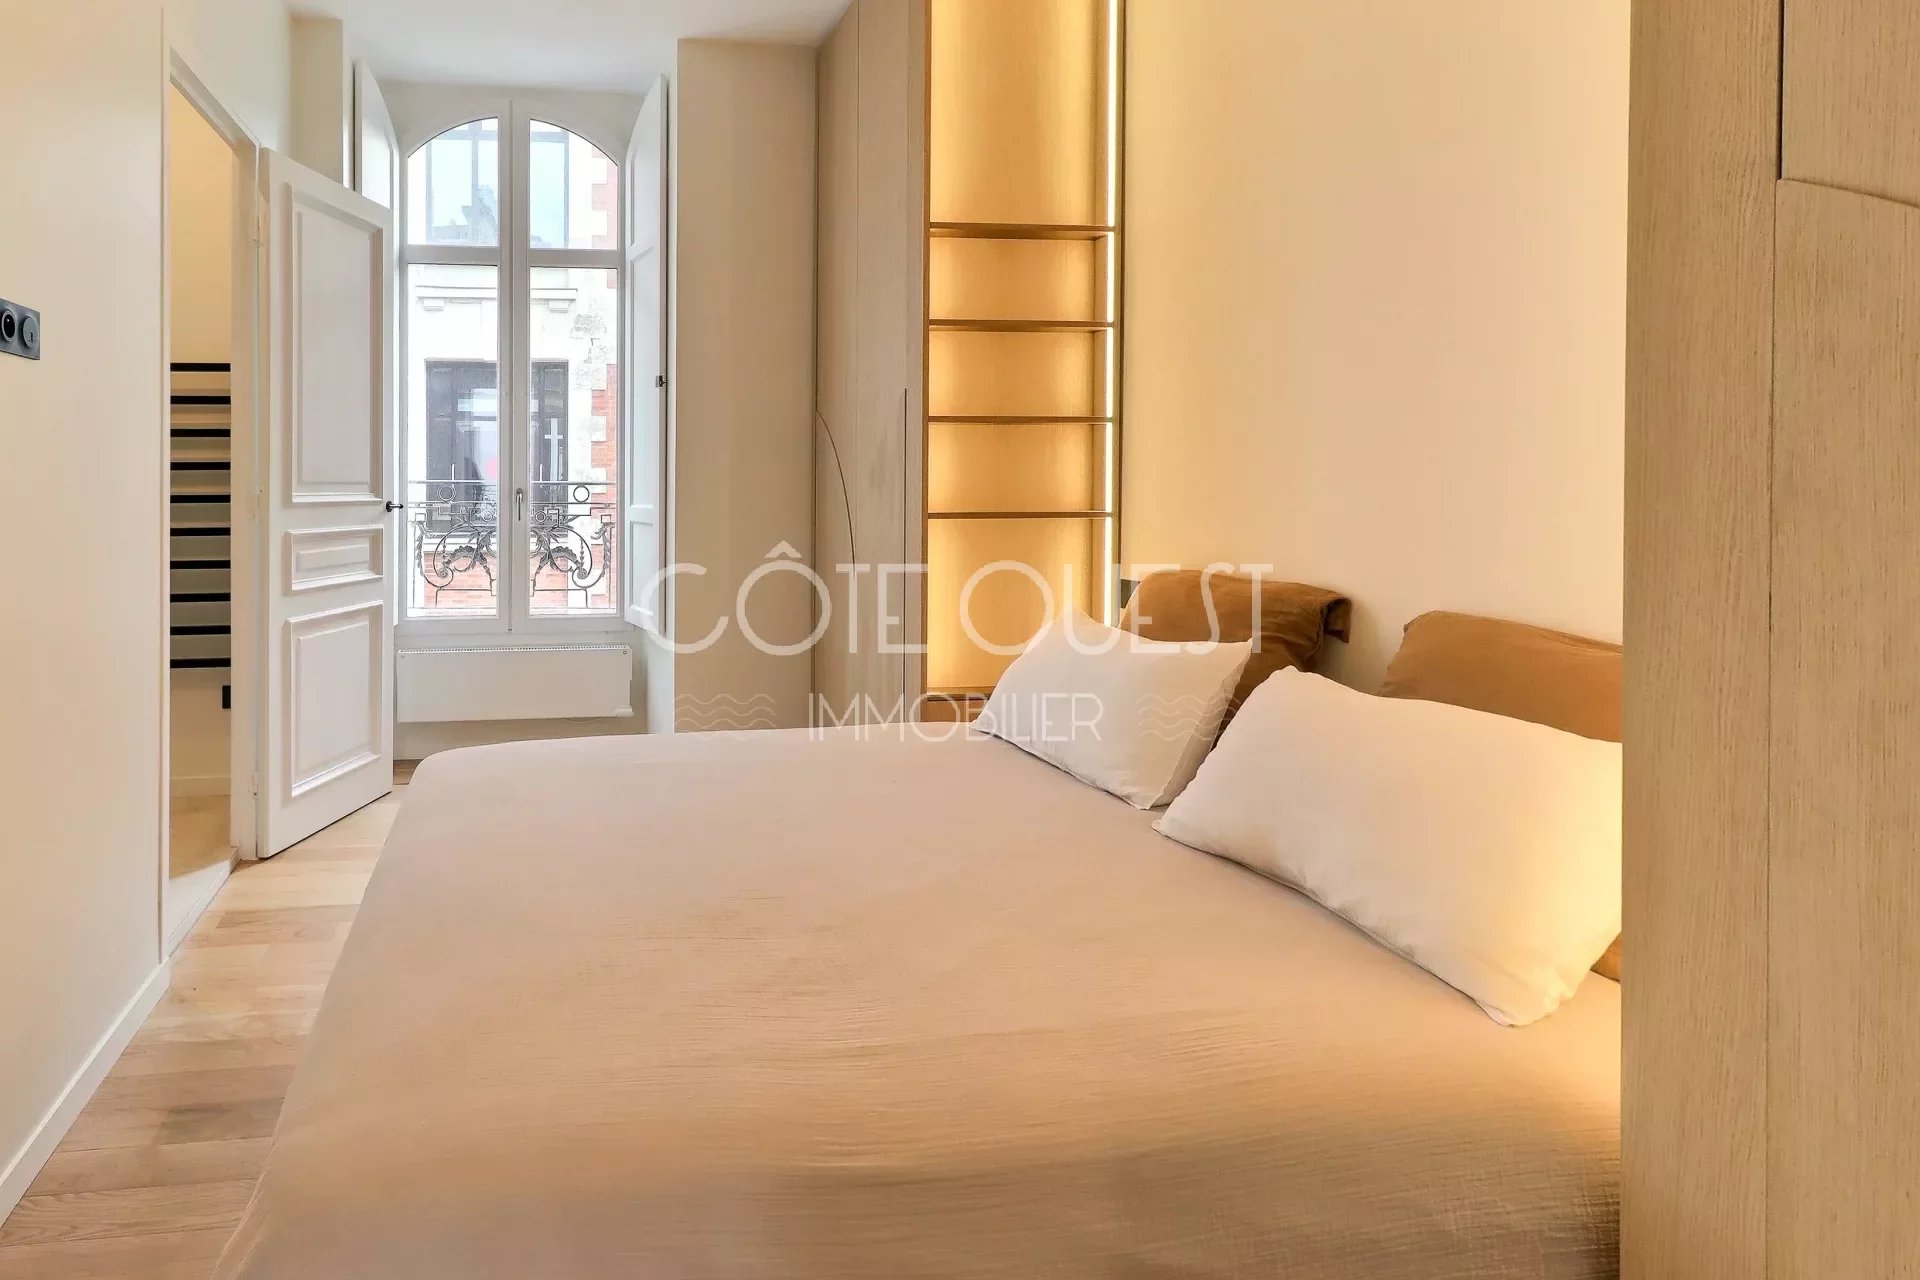 BIARRITZ CENTRE – AN ENTIRELY RENOVATED 3-ROOM APARTMENT